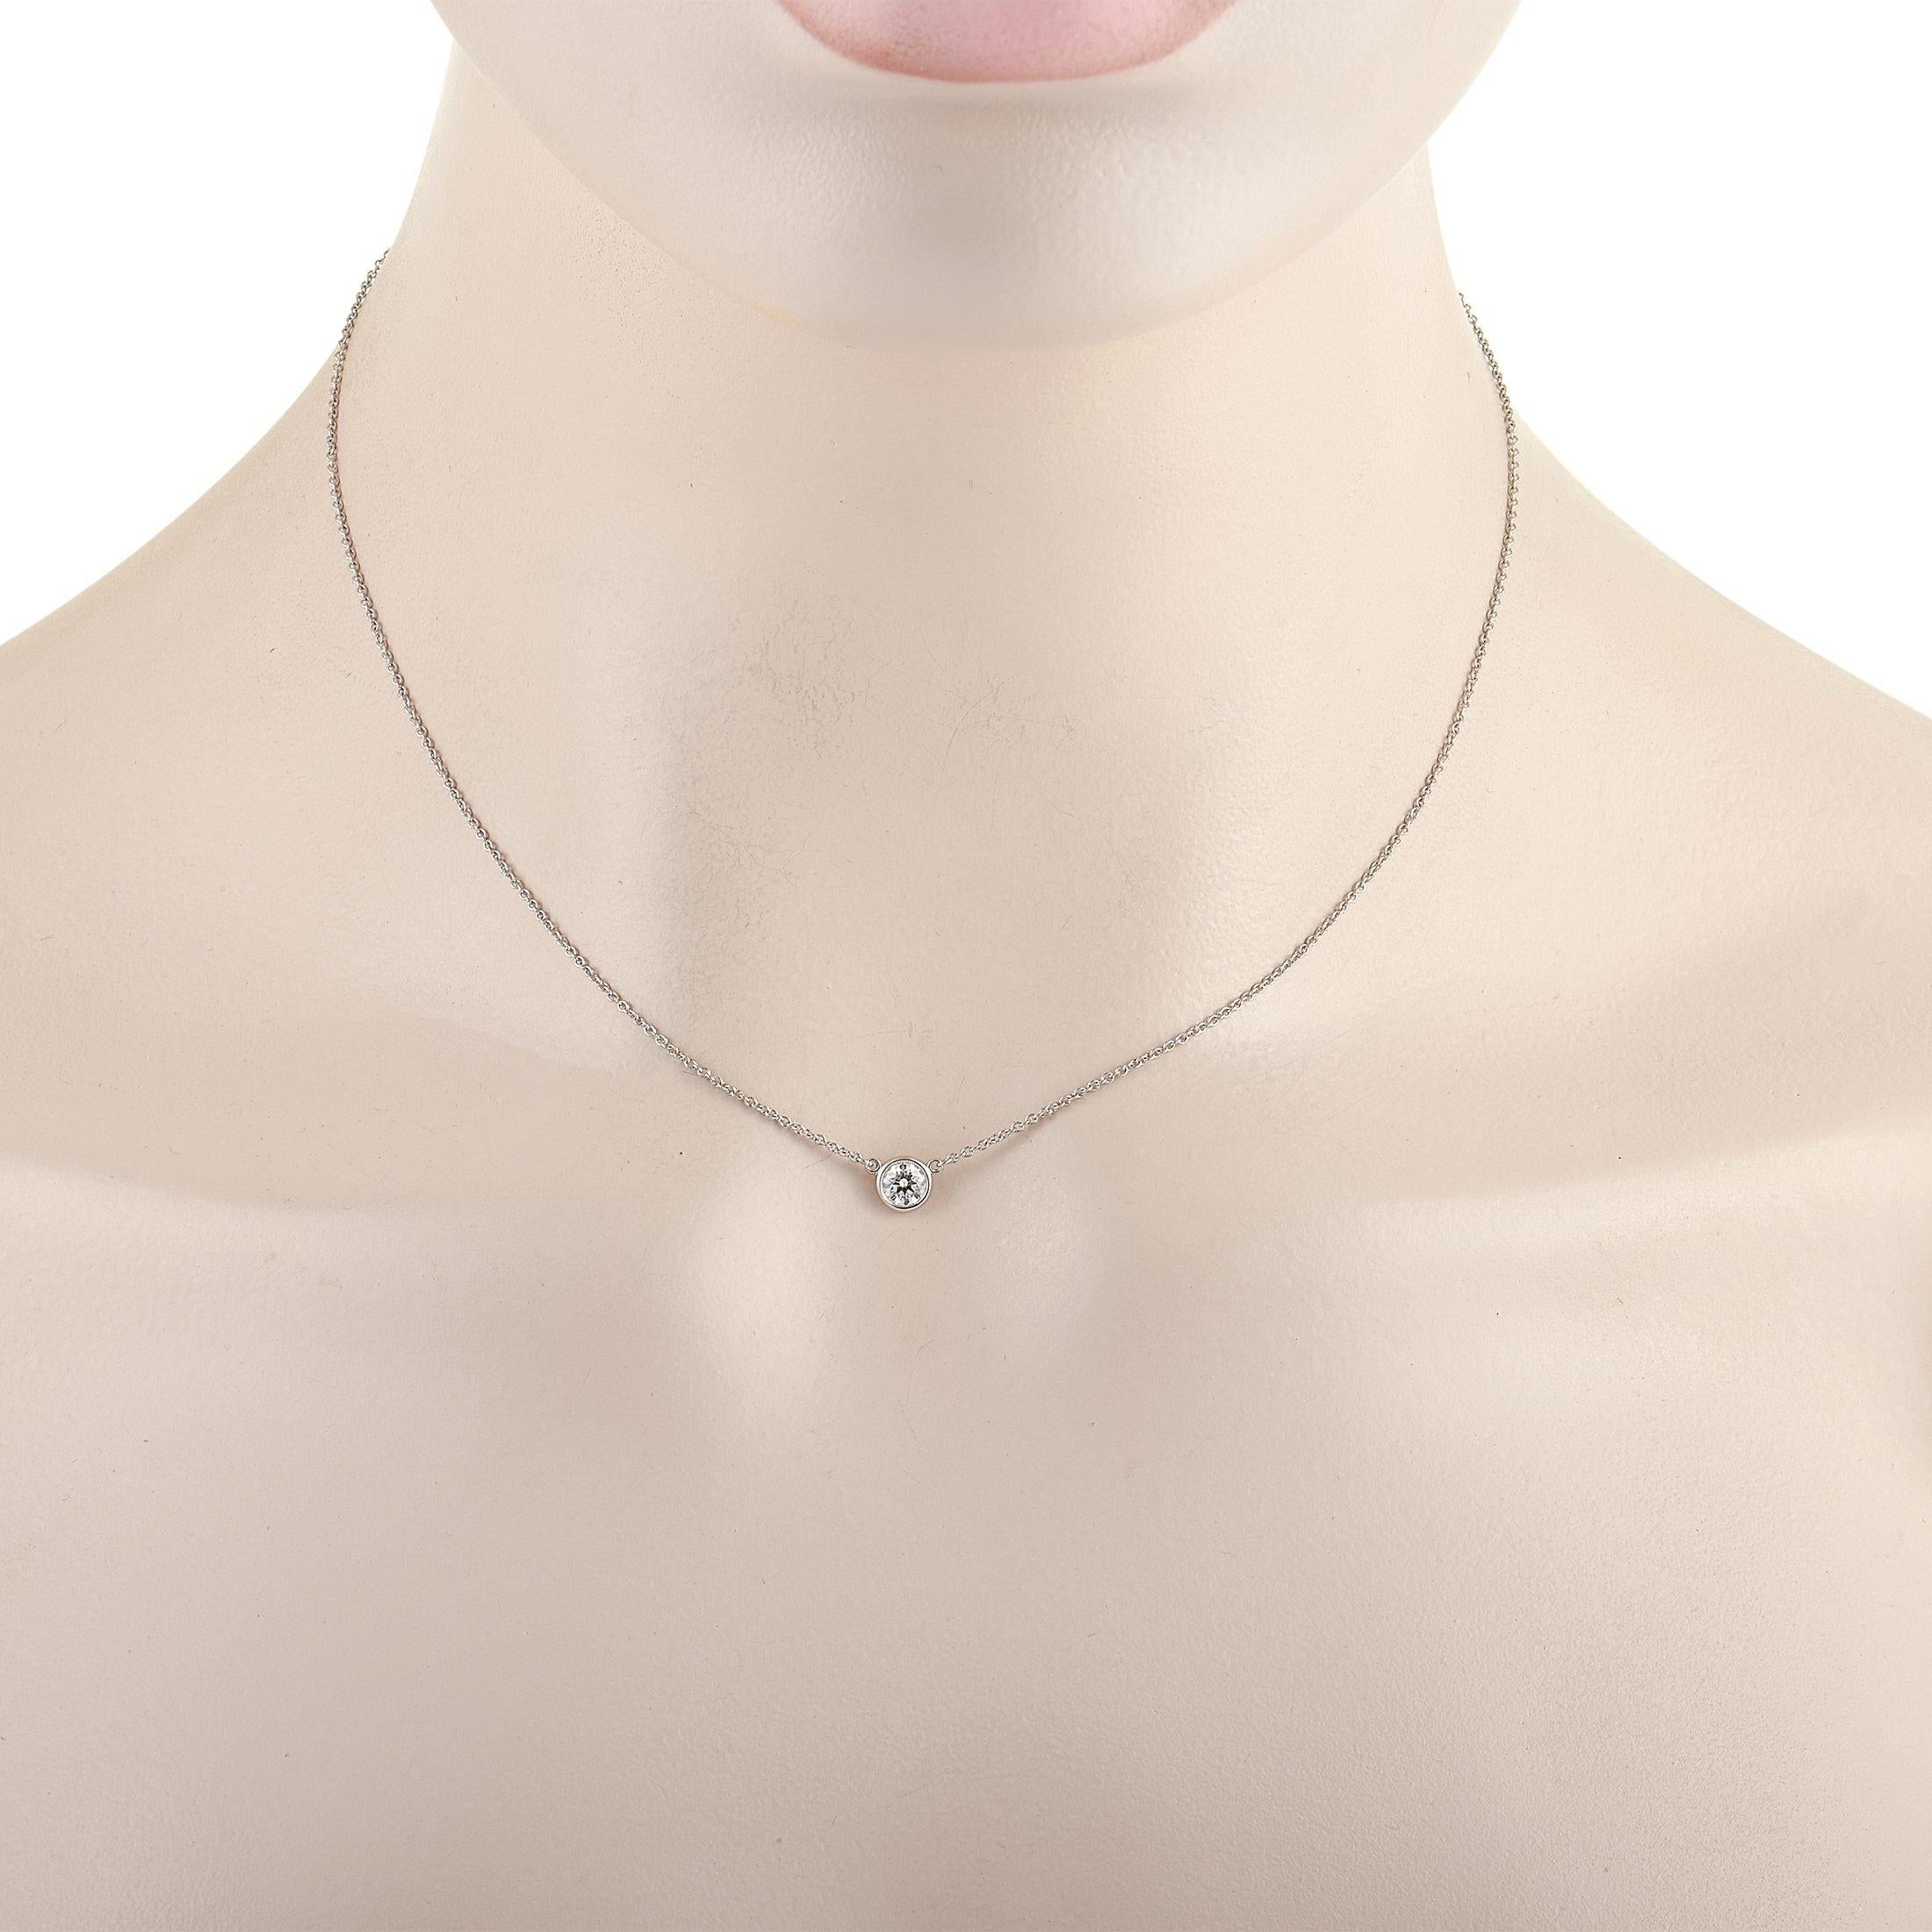 A simple style that is perfect for anyone with a minimalist aesthetic, this platinum necklace from the Elsa Peretti from Tiffany & Co. is truly timeless. At the center of a 16” chain, you’ll find a 0.33 carat diamond solitaire within a sleek bezel